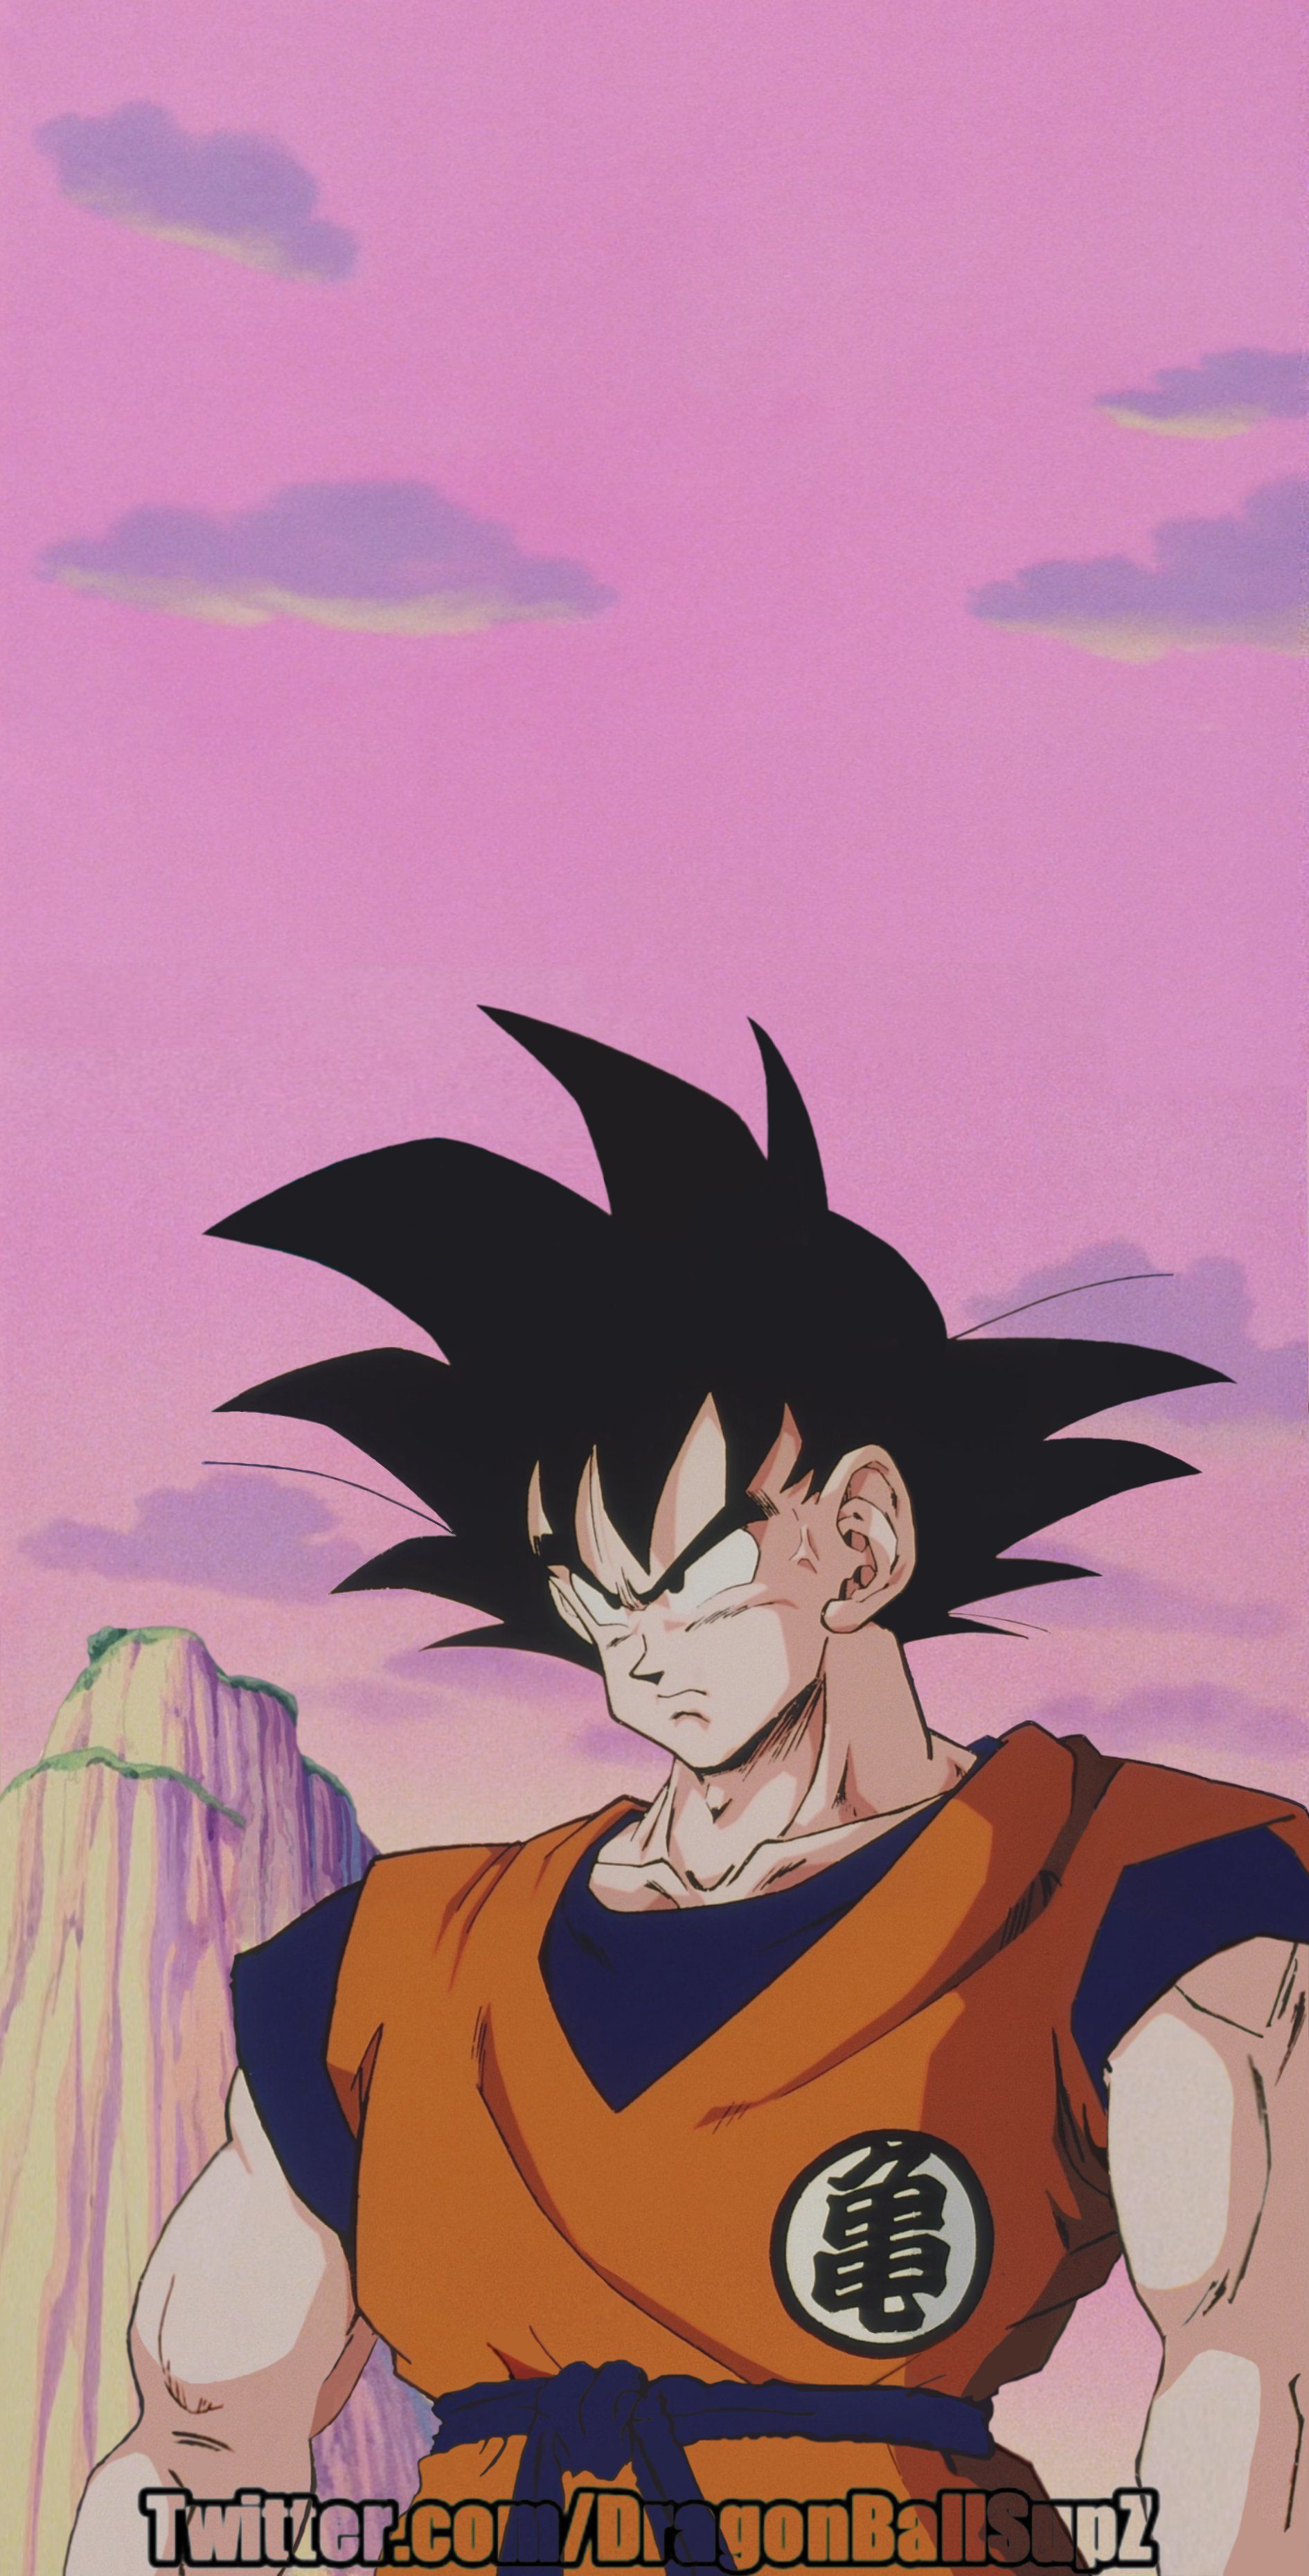 Dragon Ball Perfect Shots is your favorite Dragon Ball character?